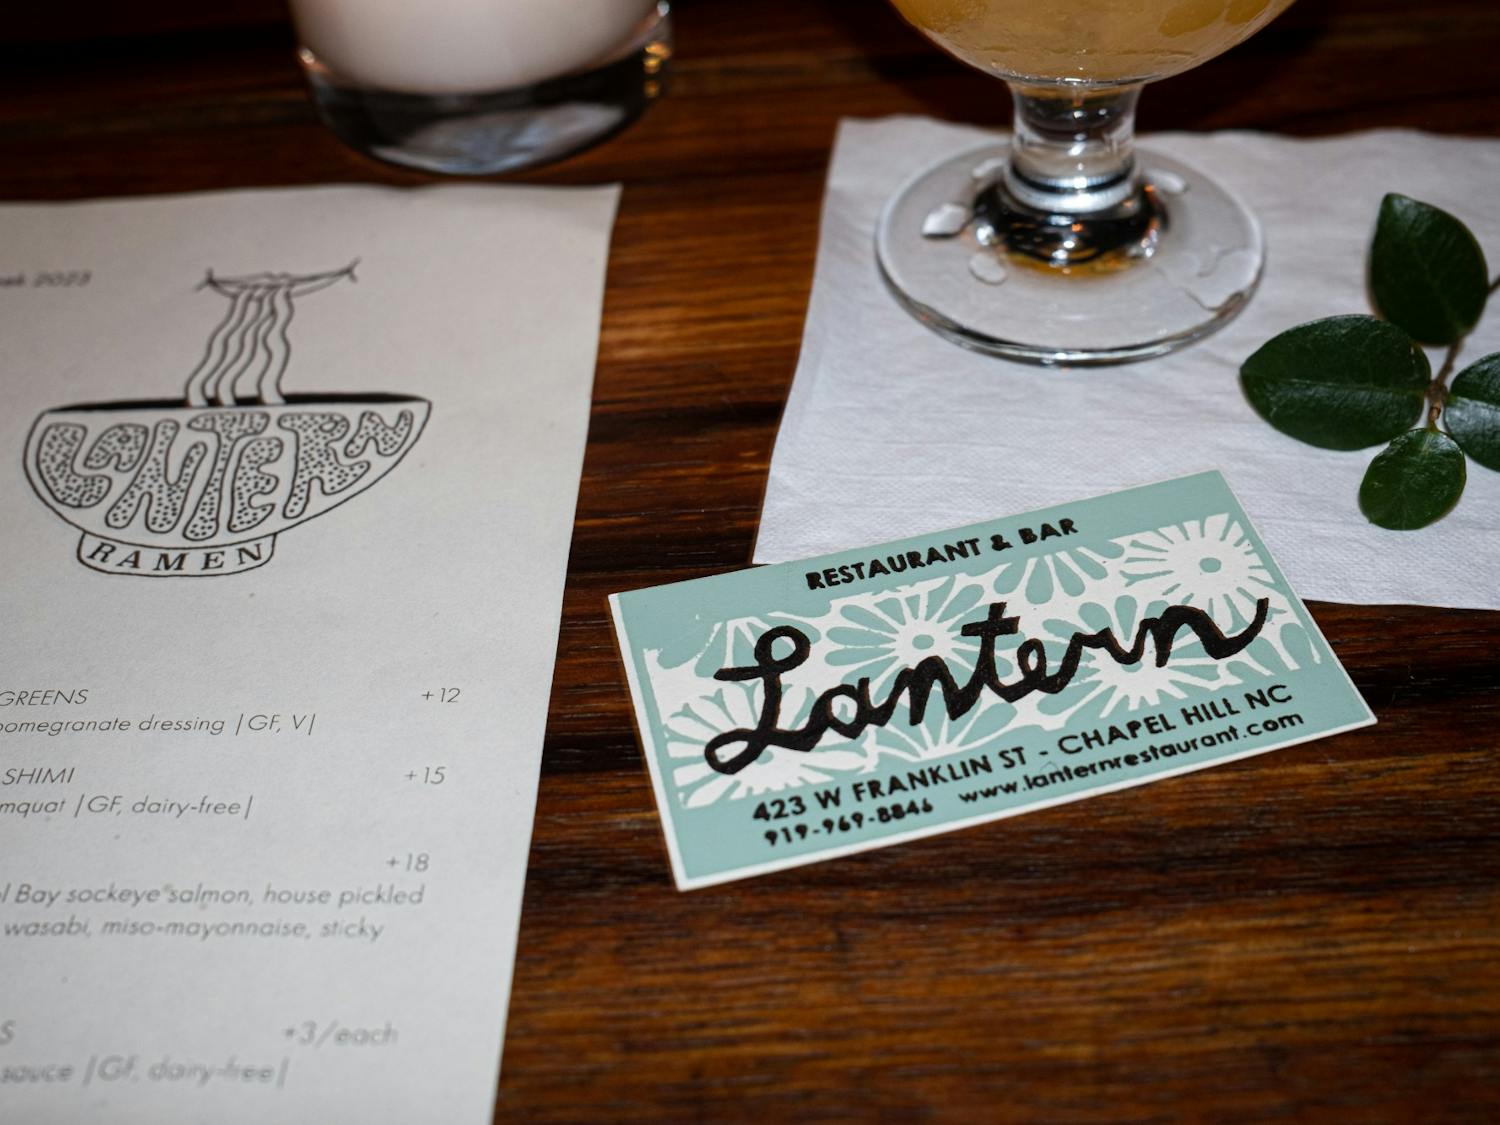 Lantern, an Asian-fusion restaurant on West Franklin Street, participated in Triangle Restaurant Week and is pictured here on Tuesday, Jan. 31, 2023.